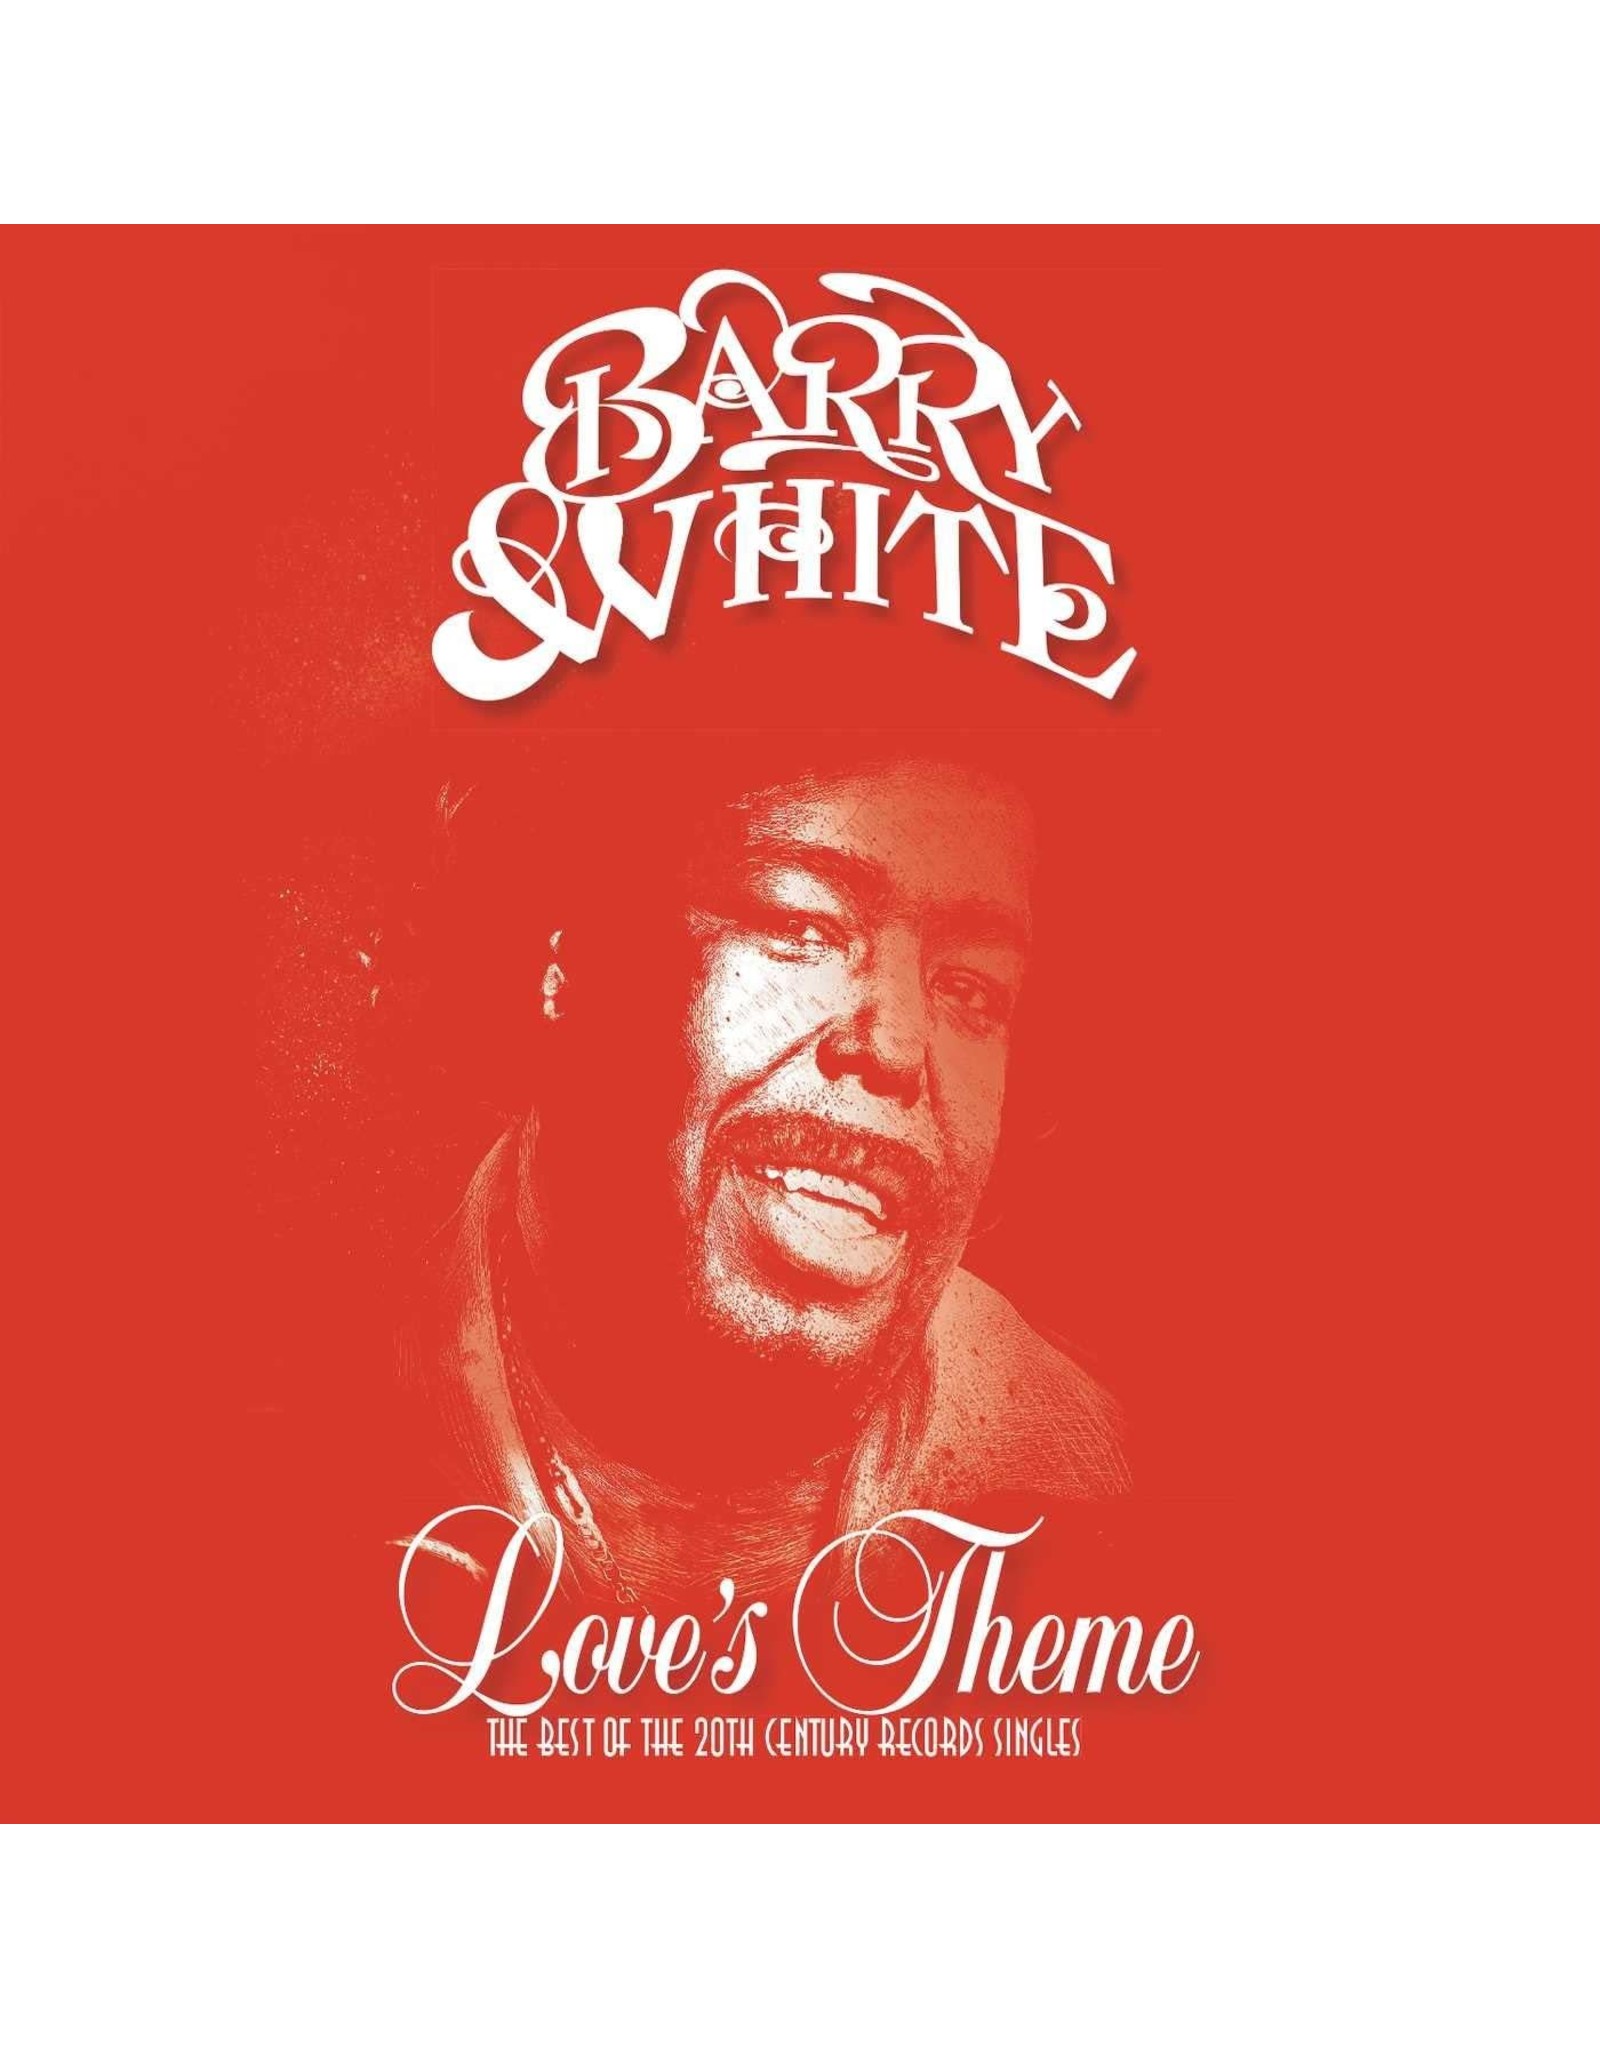 Barry White - Love's Theme (The Best of 20th Century Records Singles)